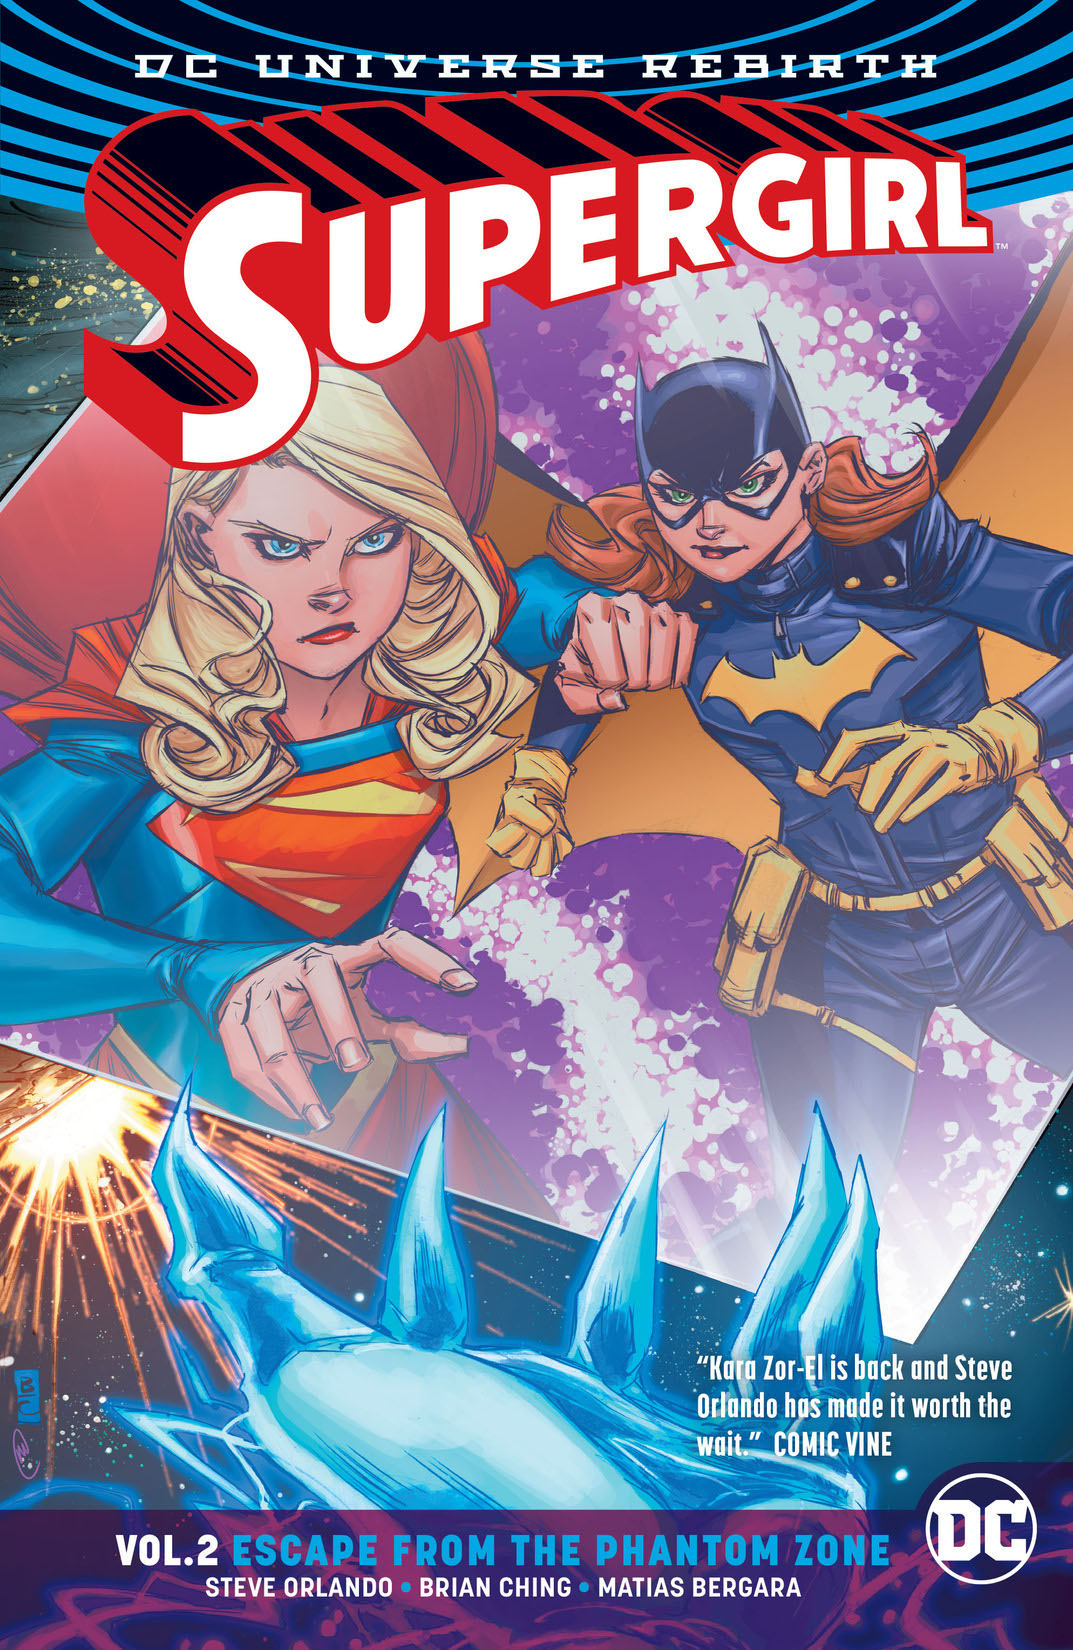 Supergirl Vol. 2: Escape from the Phantom Zone preview images